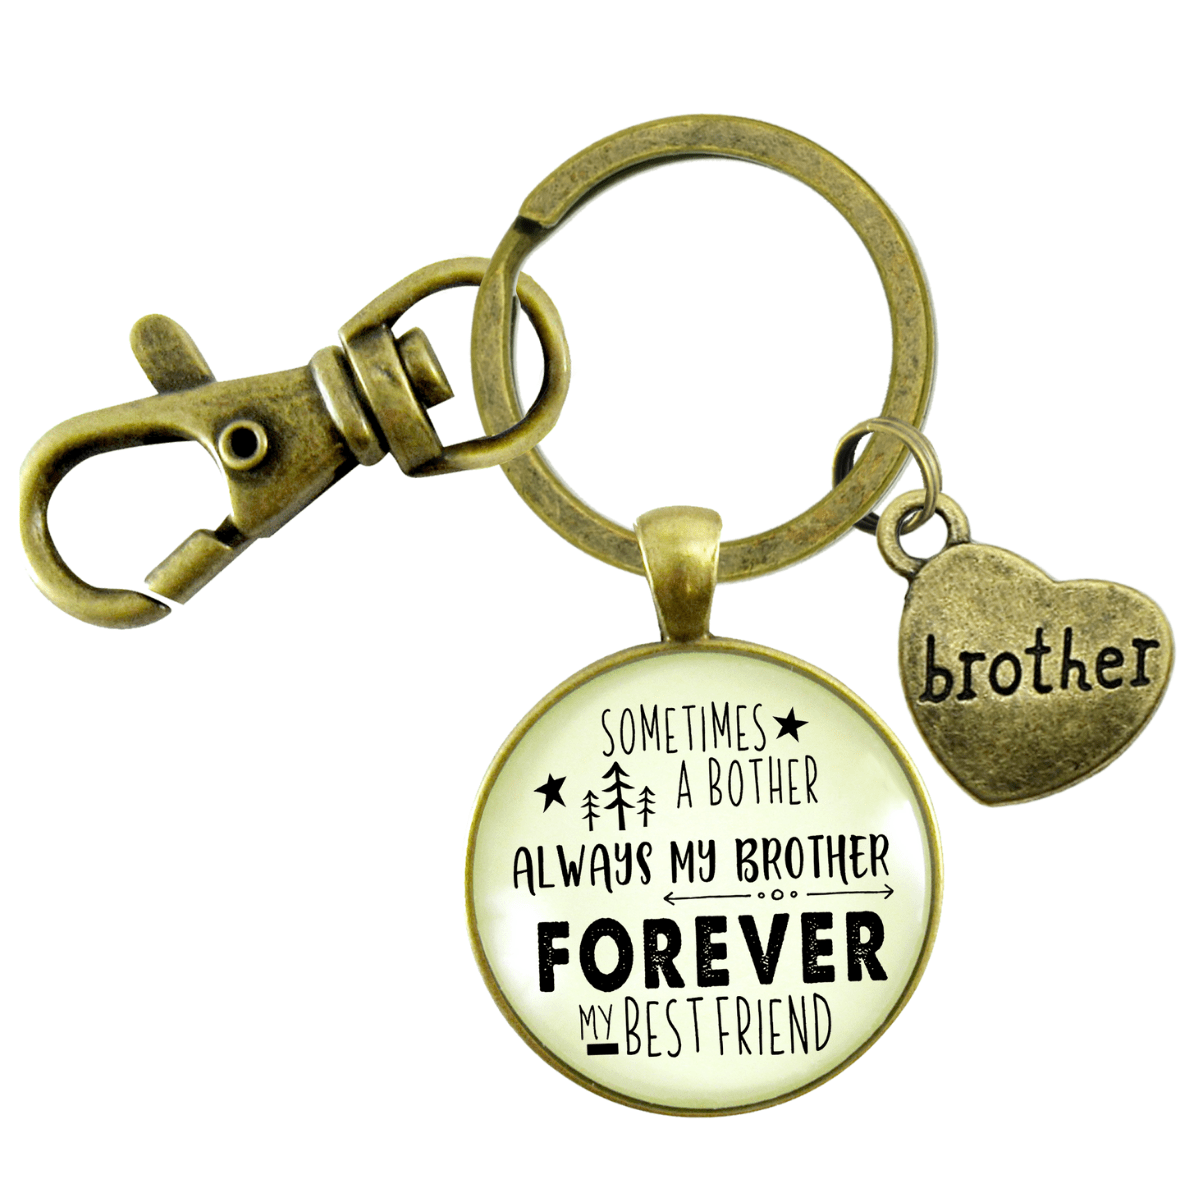 Brother Keychain Sometimes a Bother Always Brother Forever Men's Funny Gift From Sibling - Gutsy Goodness